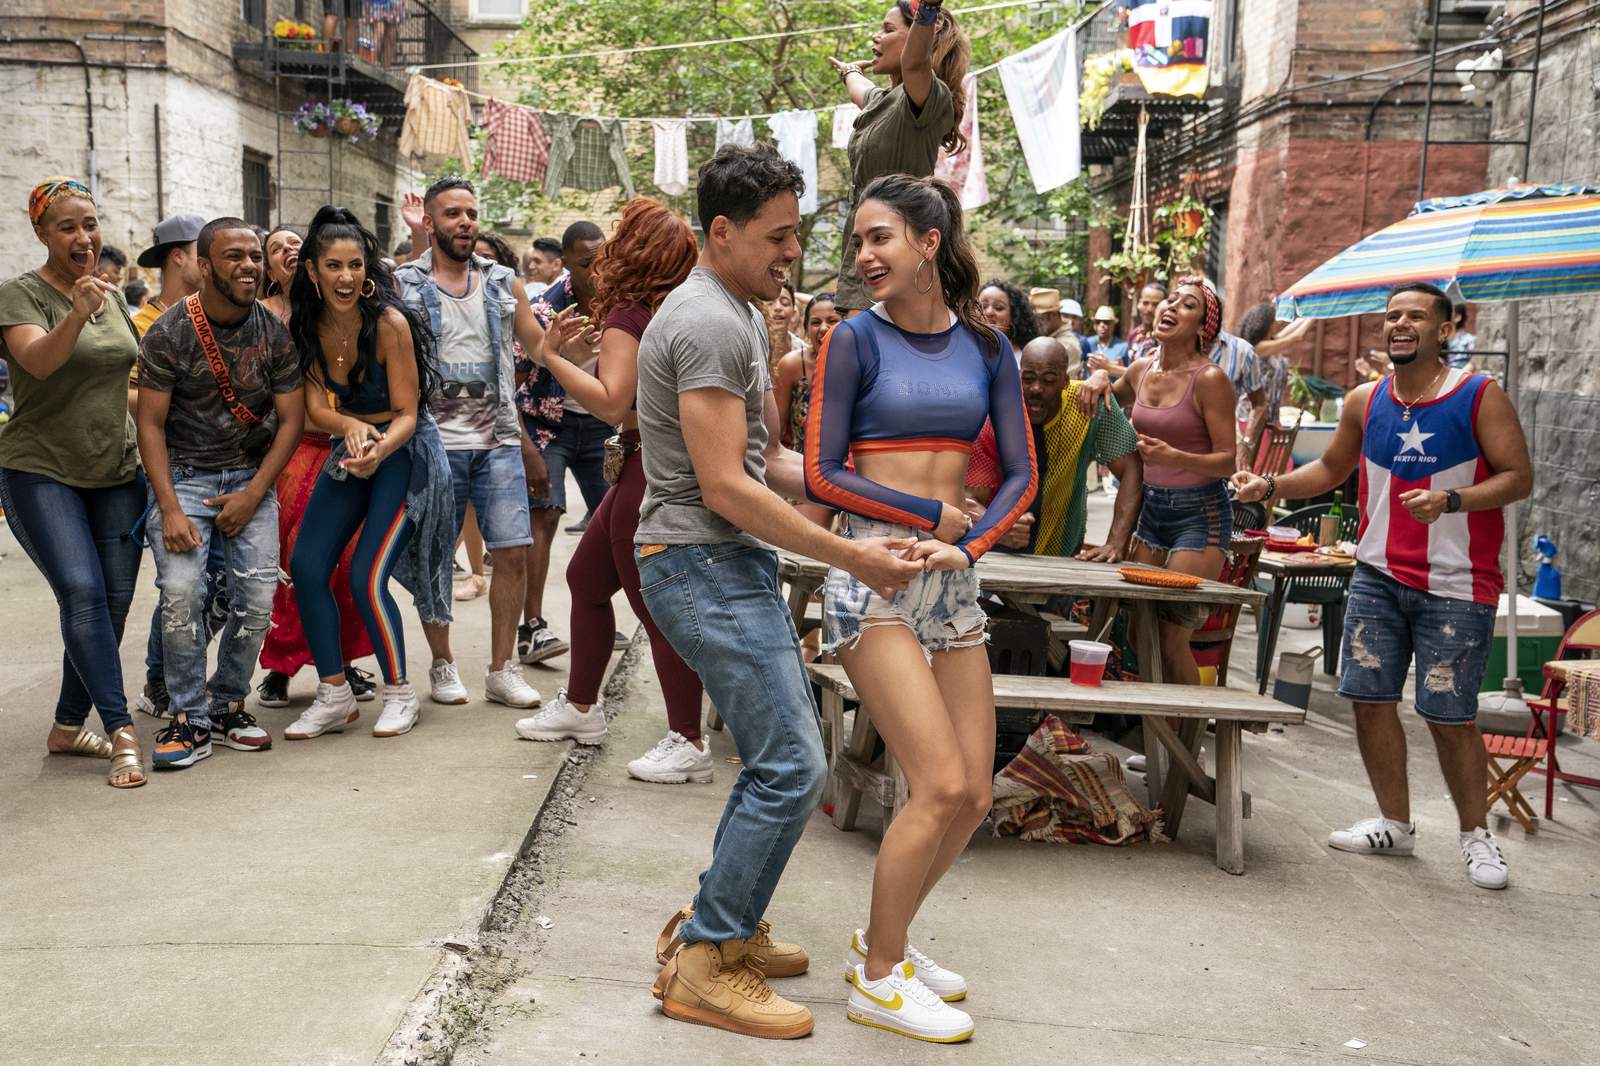 'In the Heights' to open Tribeca Film Festival in June